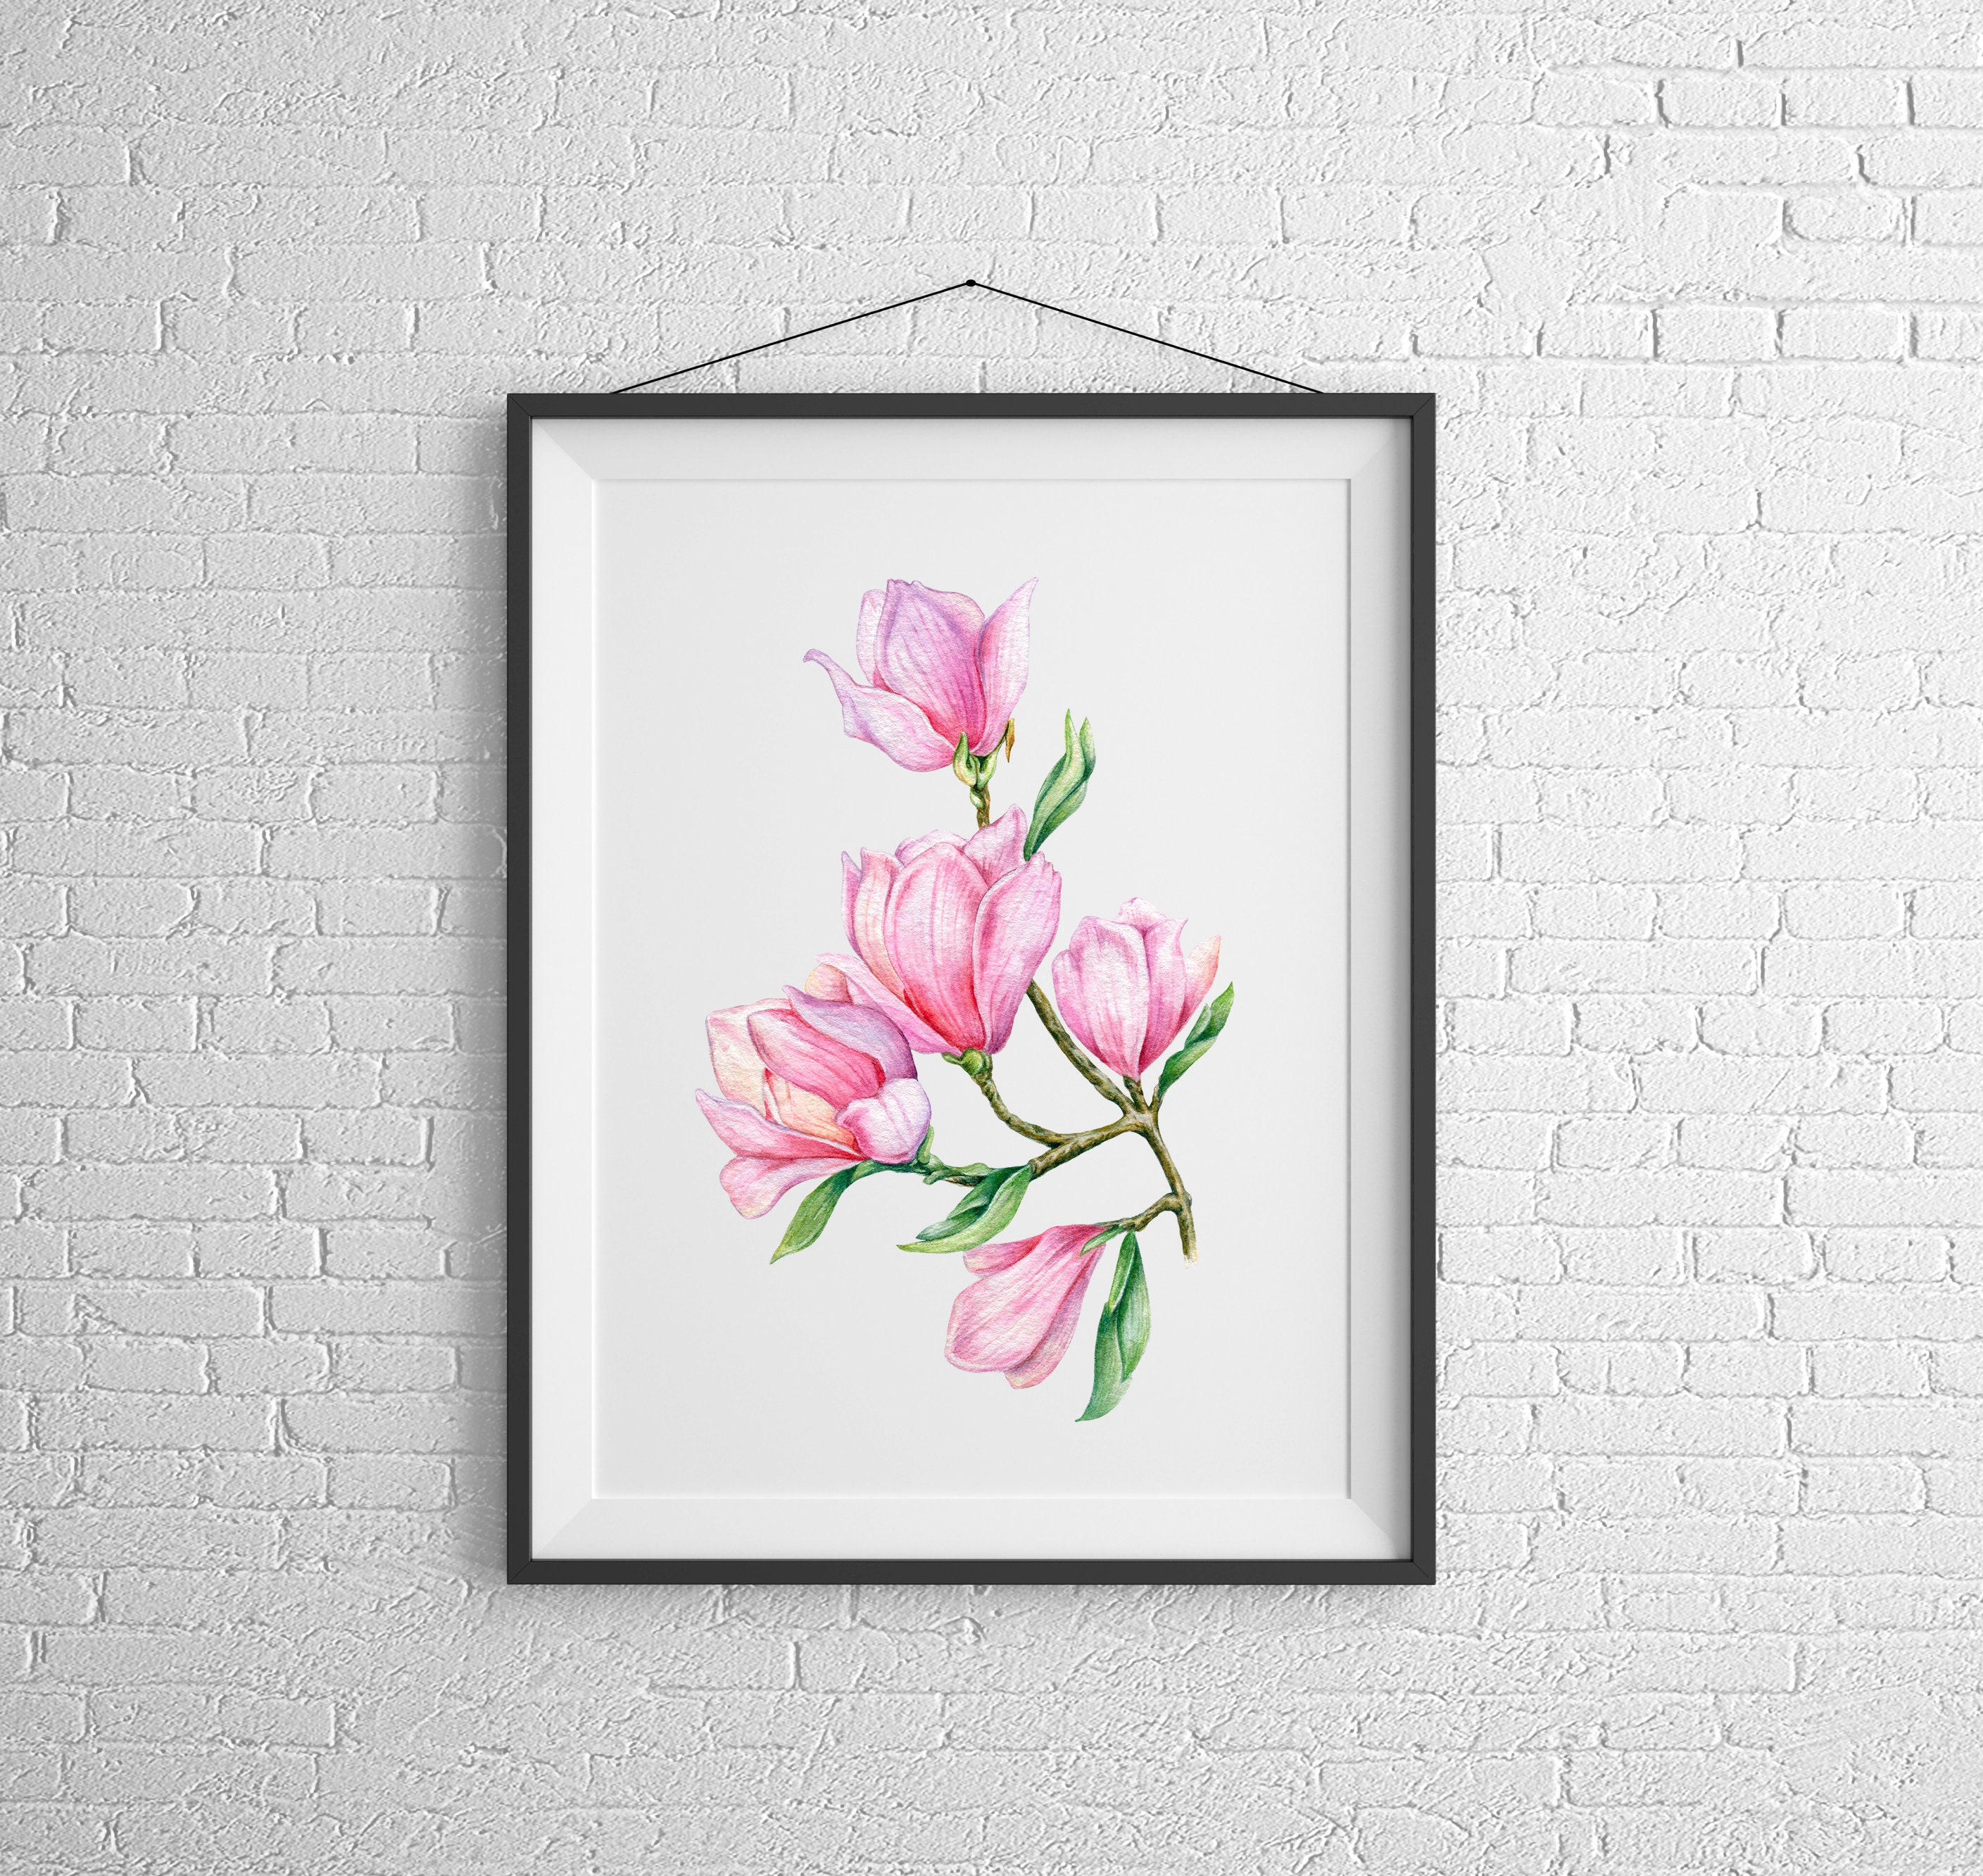 Magnolia watercolor clipart Flowers and Magnolia branchs | Etsy